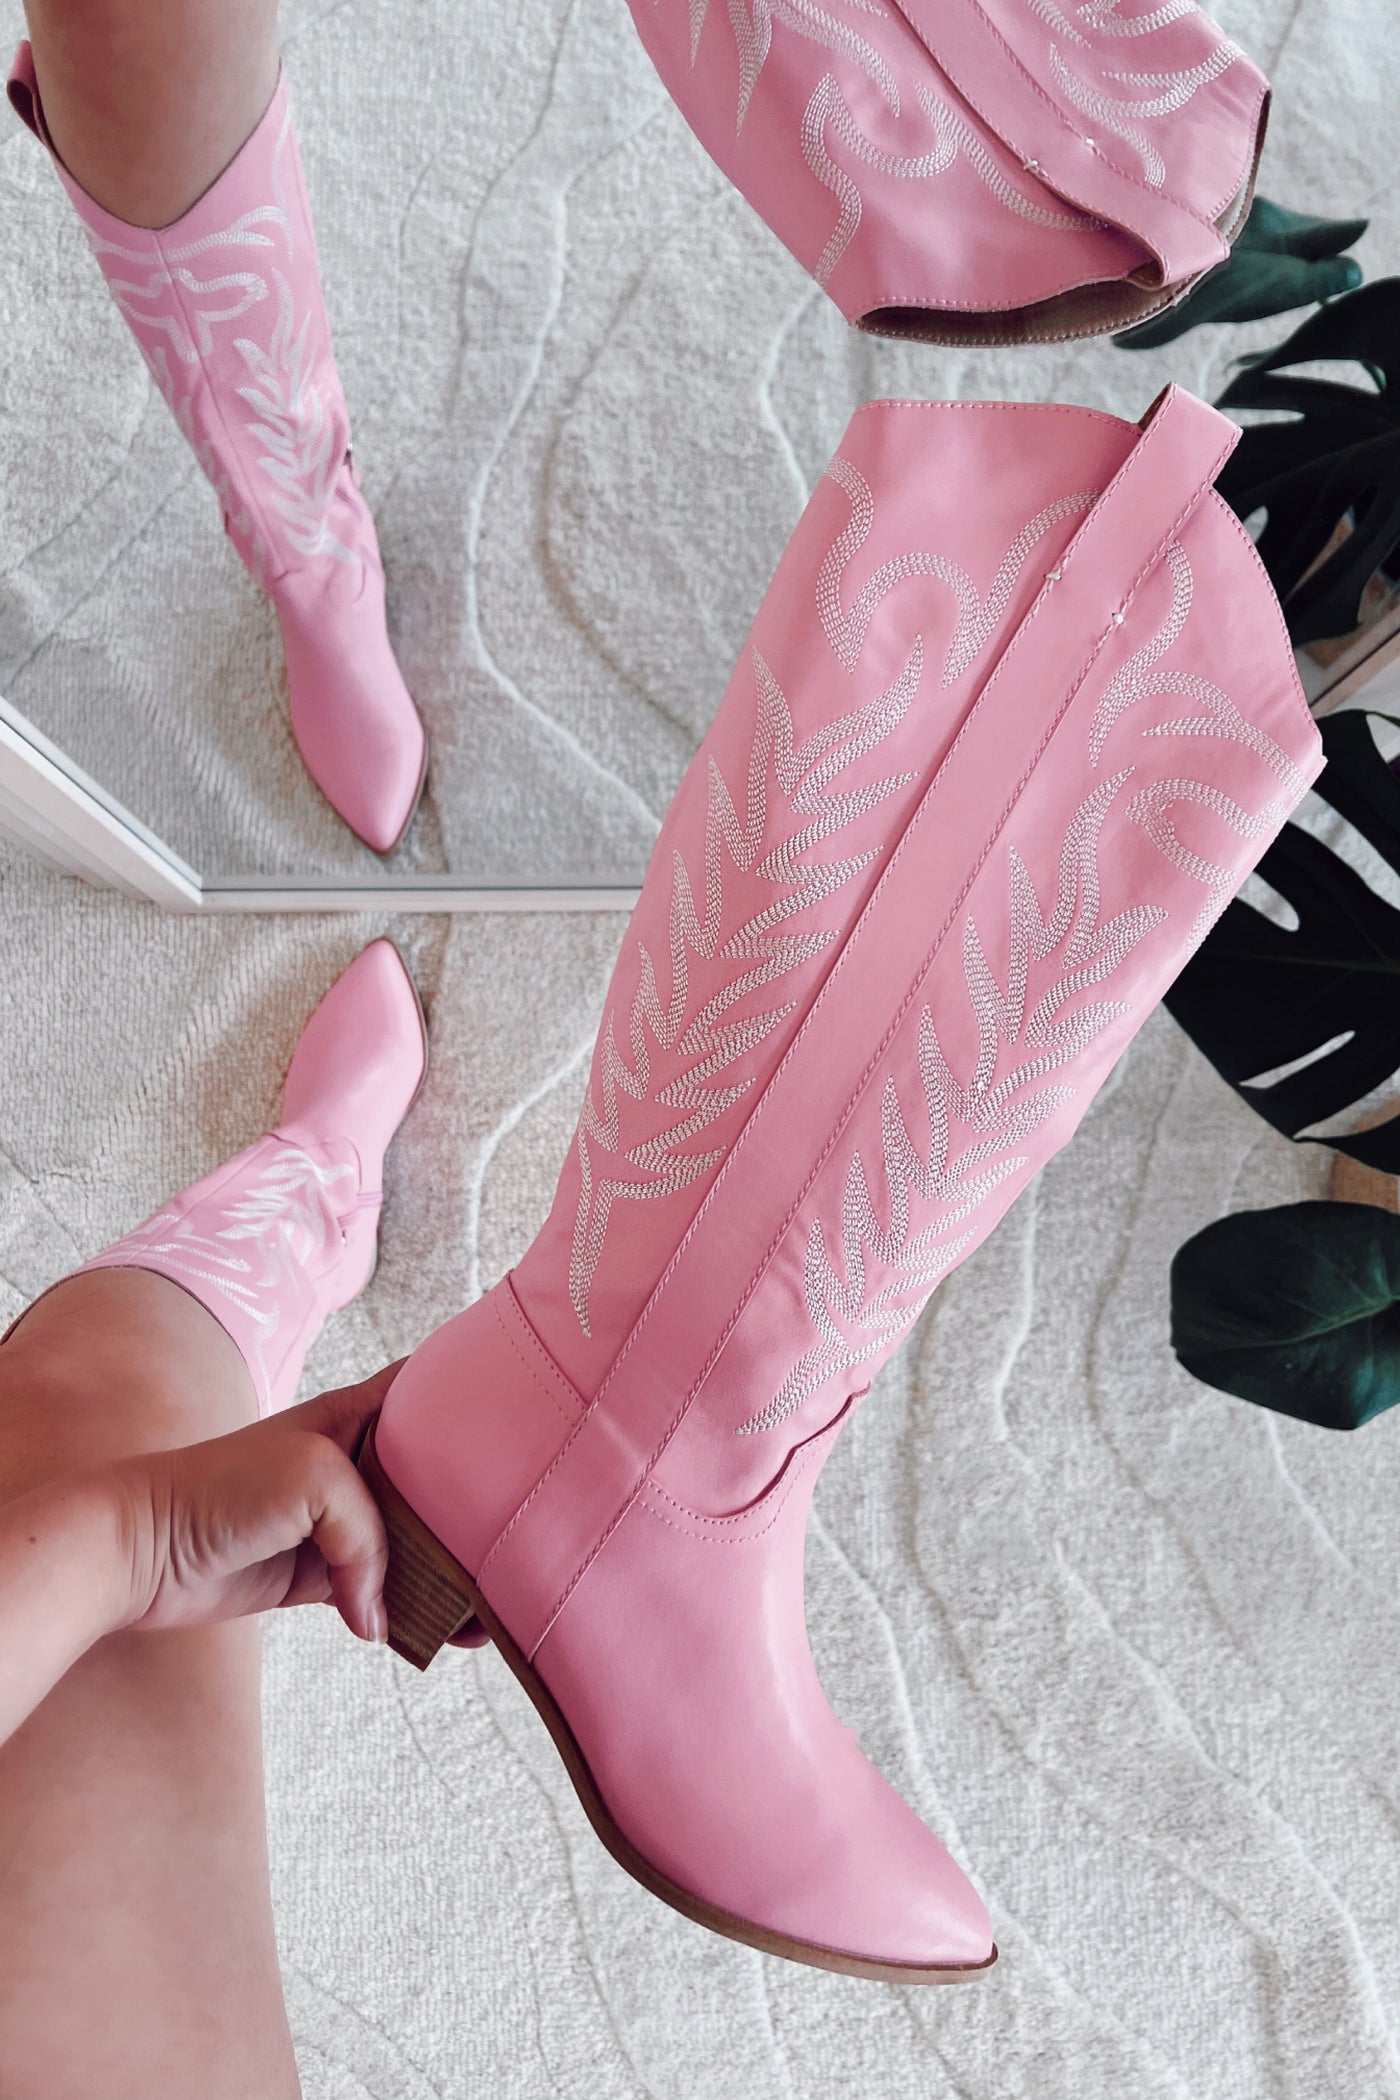 Giddy Up Pink Cowboy Boots